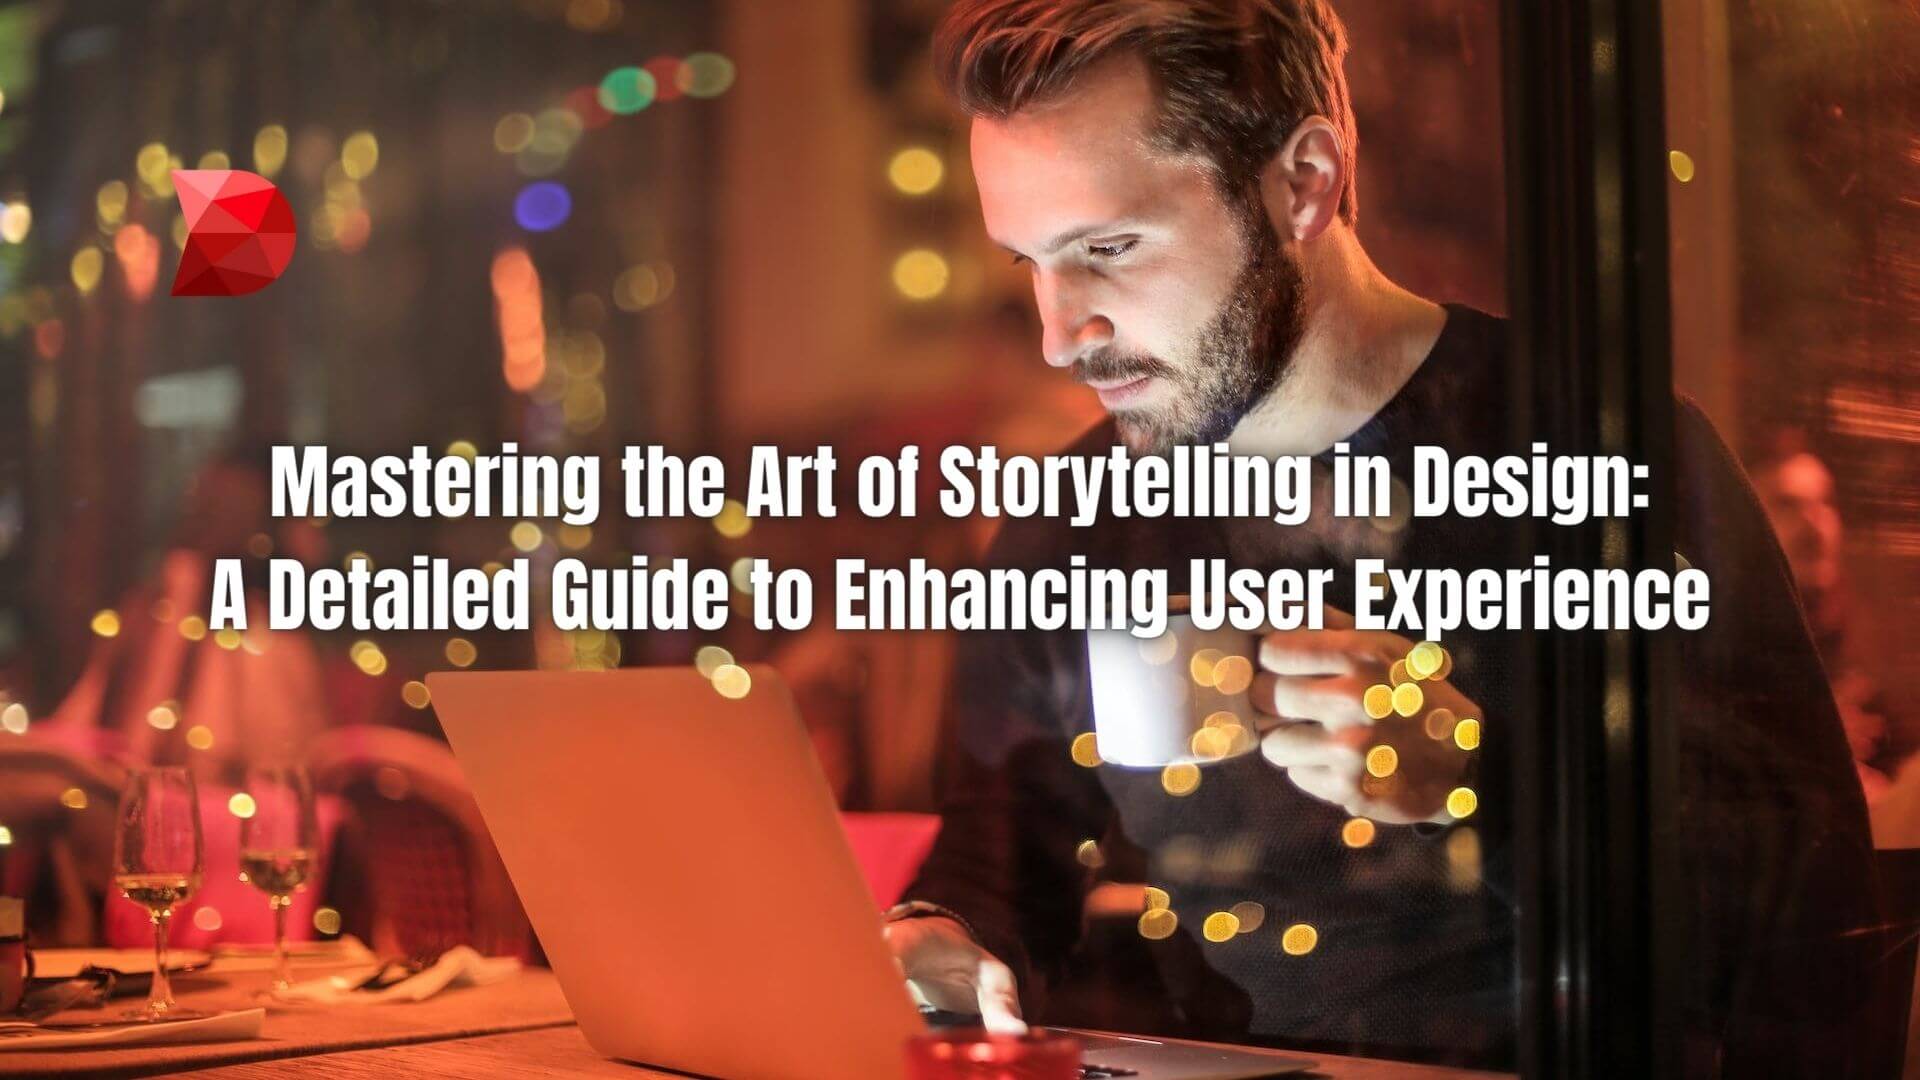 Unlock the power of storytelling in design! Click here to learn expert tips and techniques in this comprehensive guide to mastering the art.